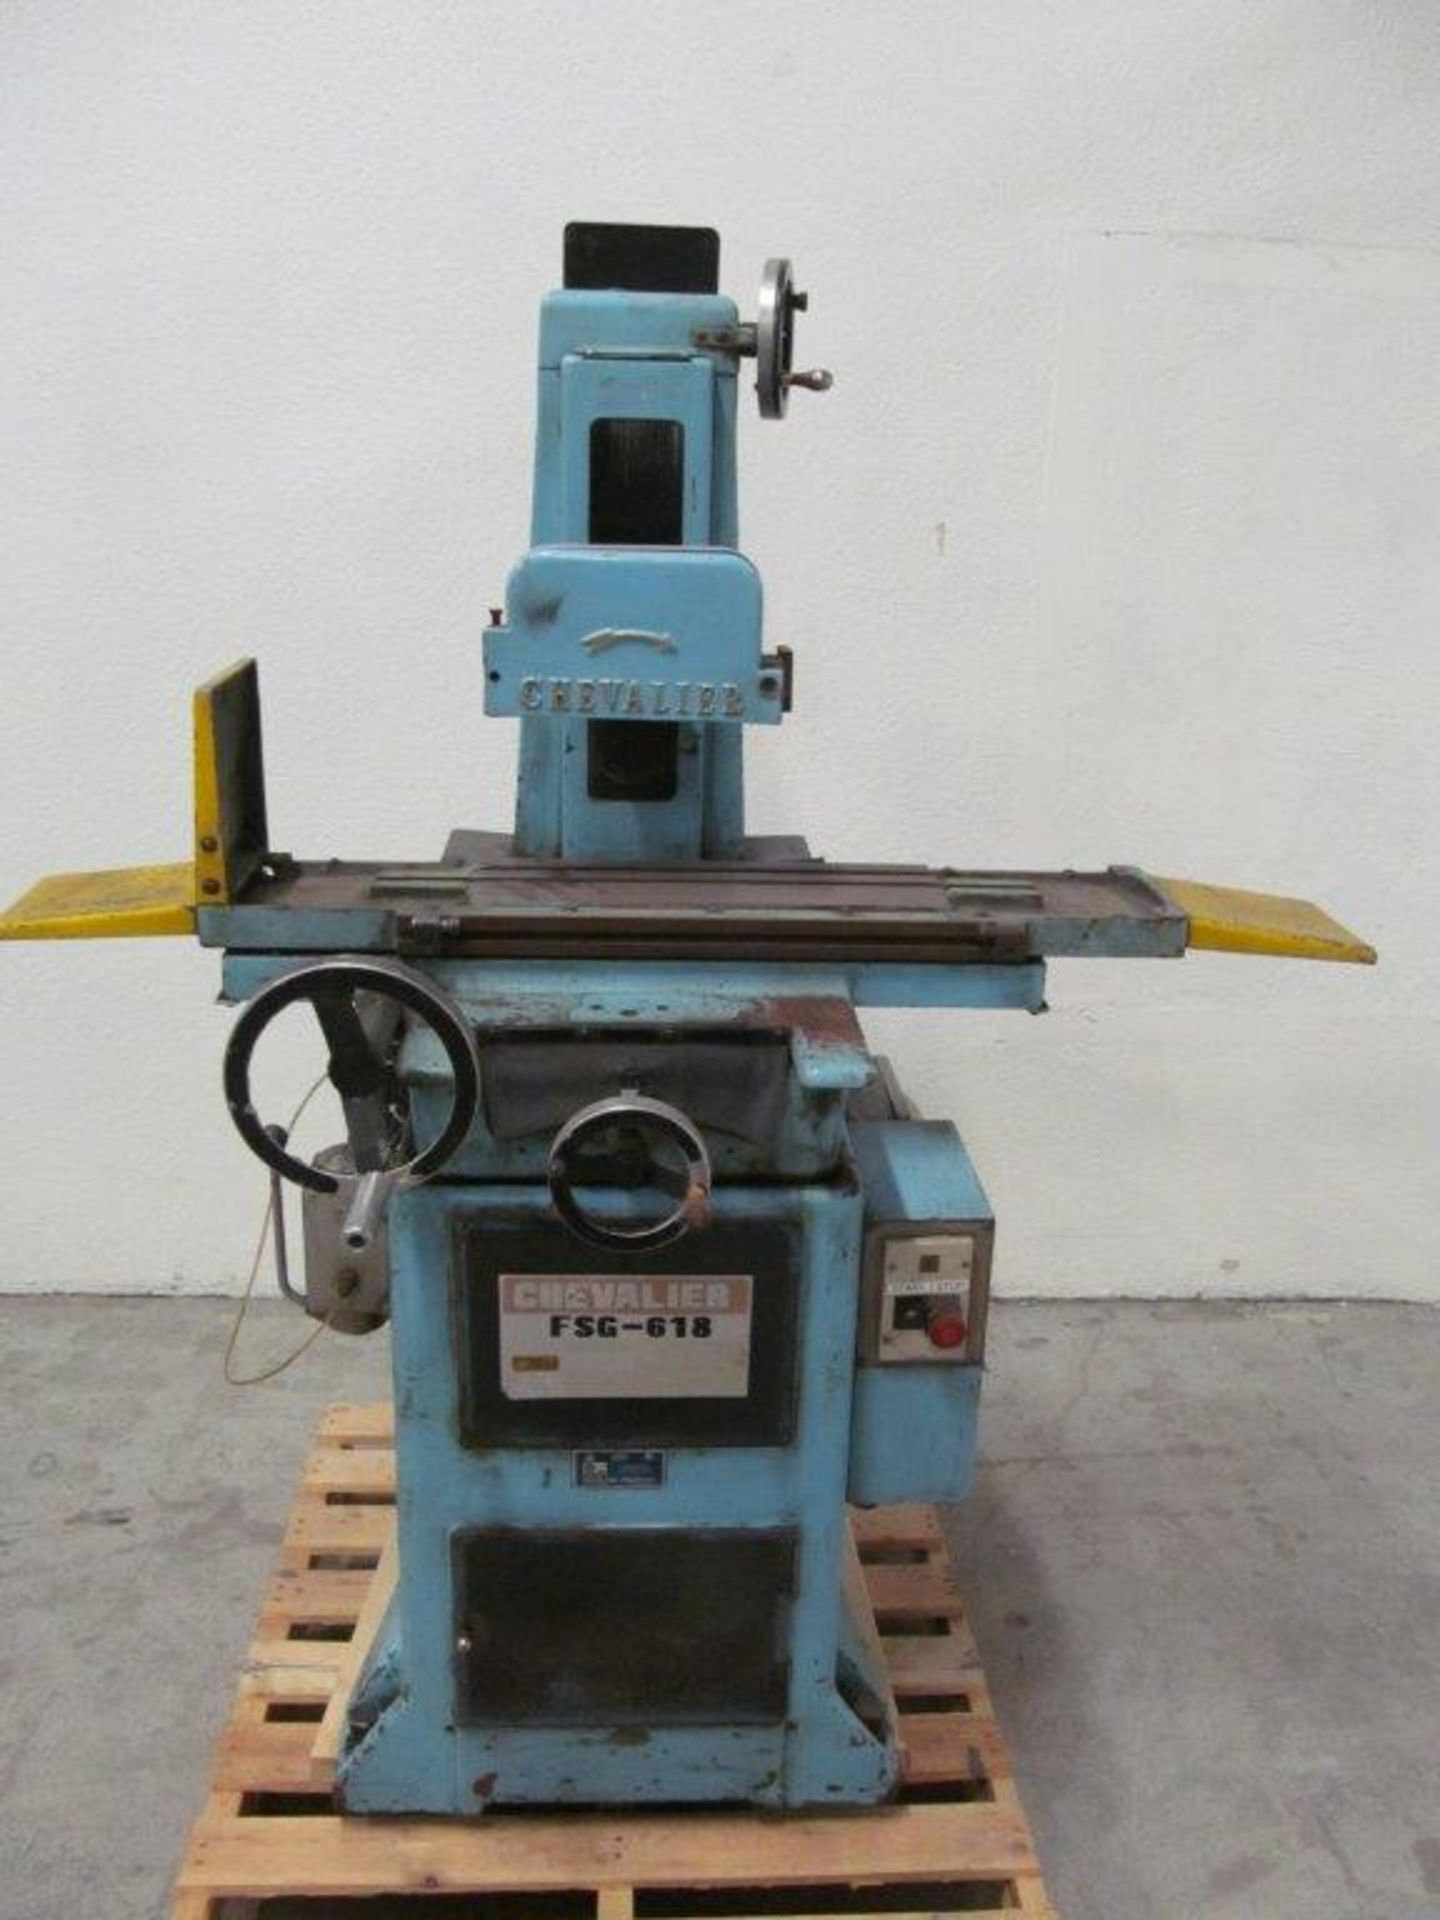 CHEVALIER FSG-618 SURFACE GRINDER, 6" X 18", ELECTRICS: 550V/3PH/60C, "CONDITION UNKNOWN" - Image 4 of 4